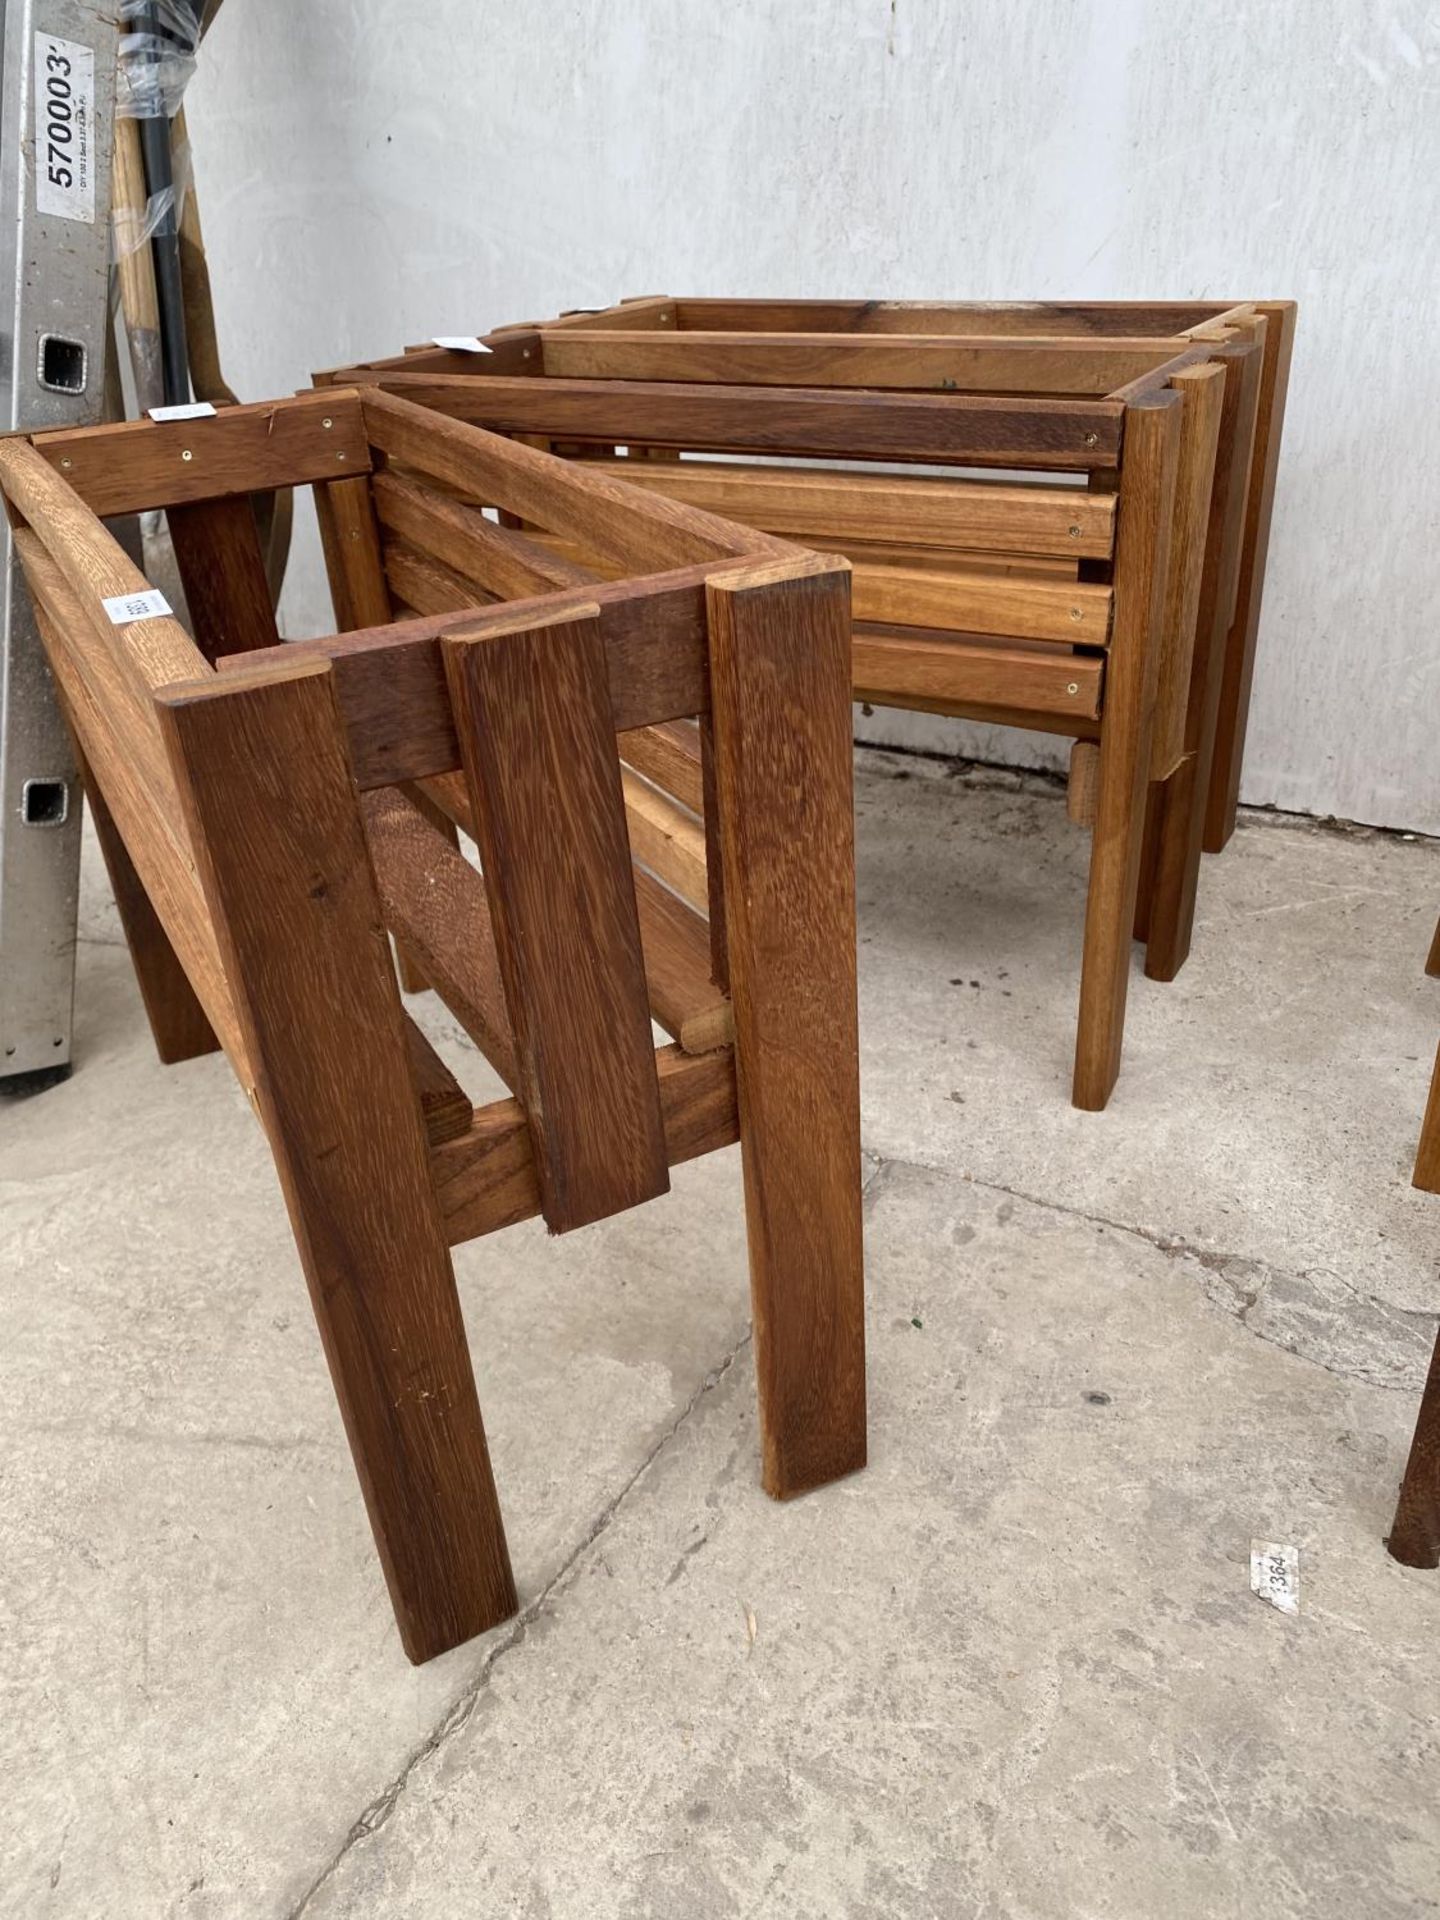 THREE WOODEN TROUGH PLANTER STANDS - Image 3 of 3